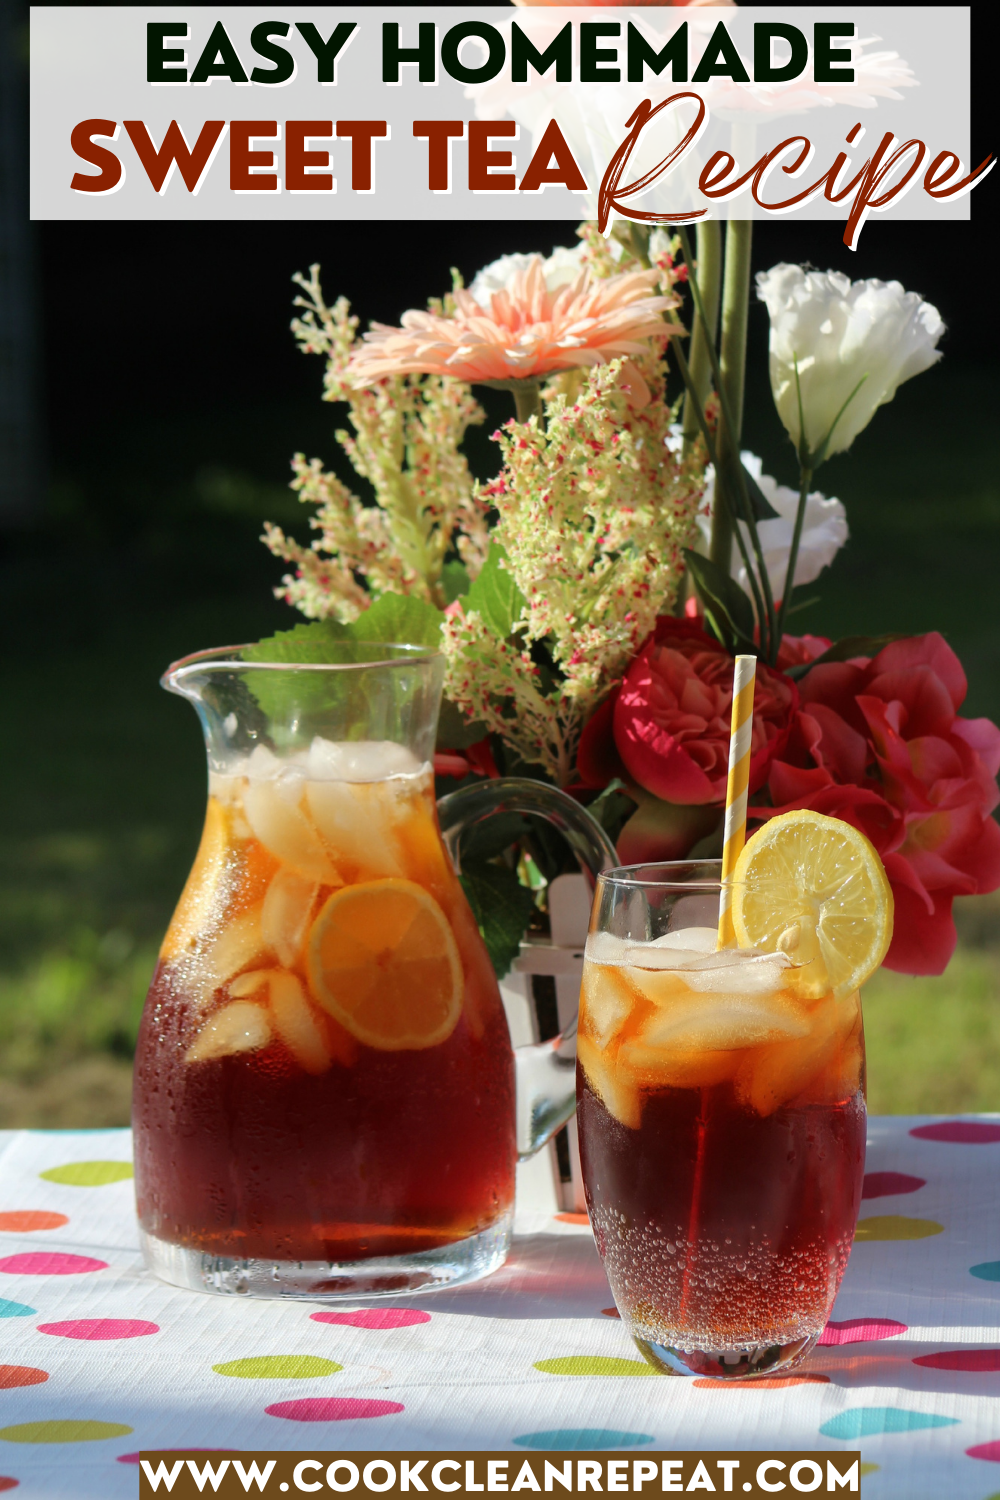 Pin showing the title Easy Homemade Sweet Tea Recipe